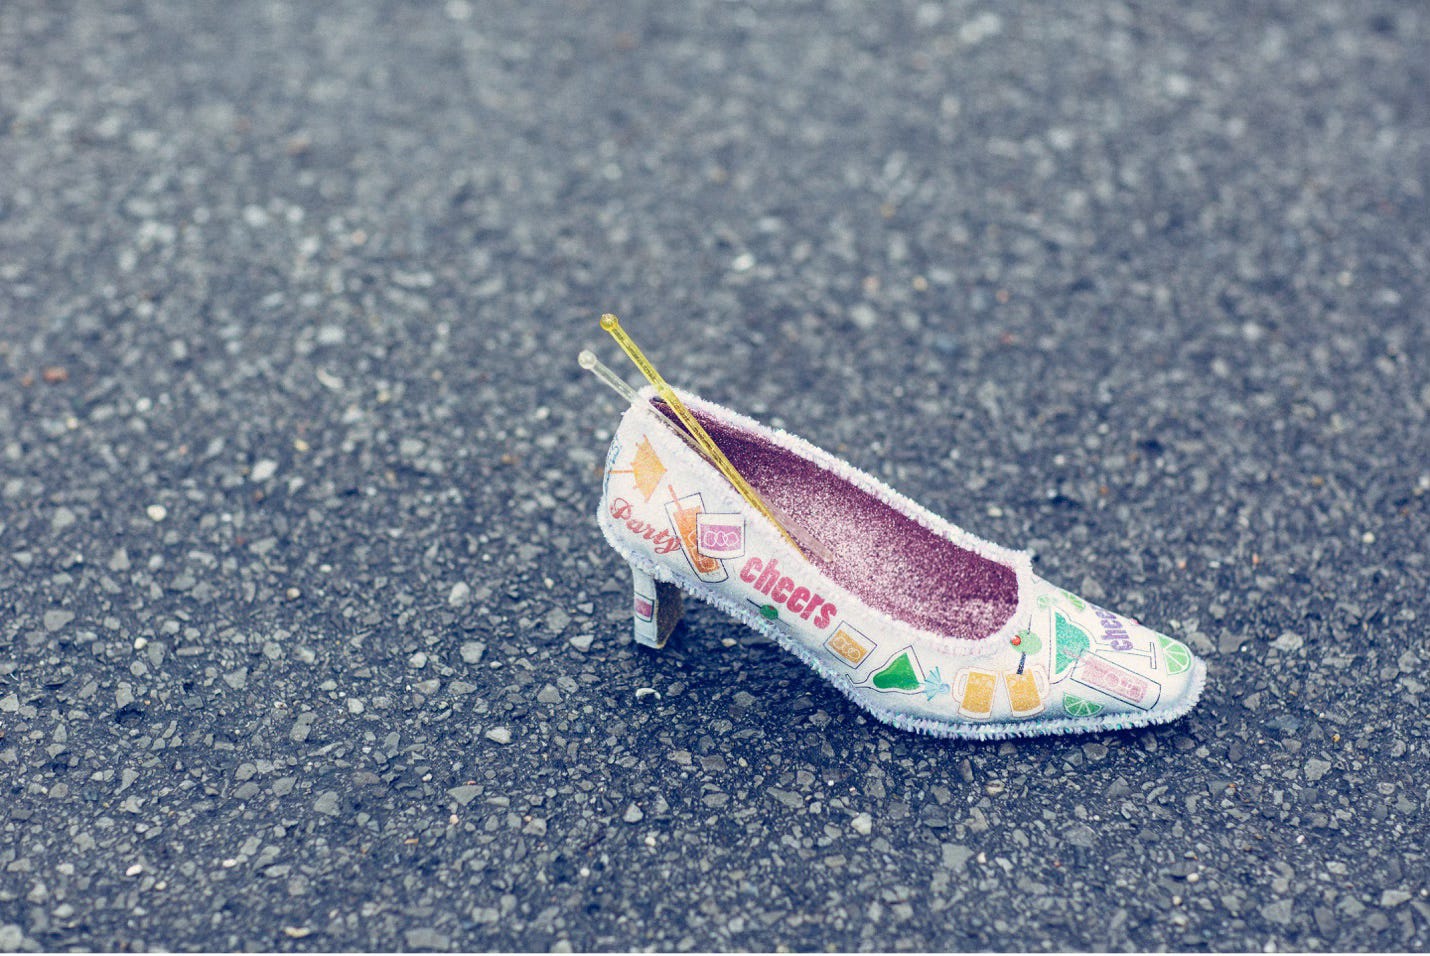 A woman's high-heeled shoe decorated and ready to be thrown in the Muses Mardi Gras parade.